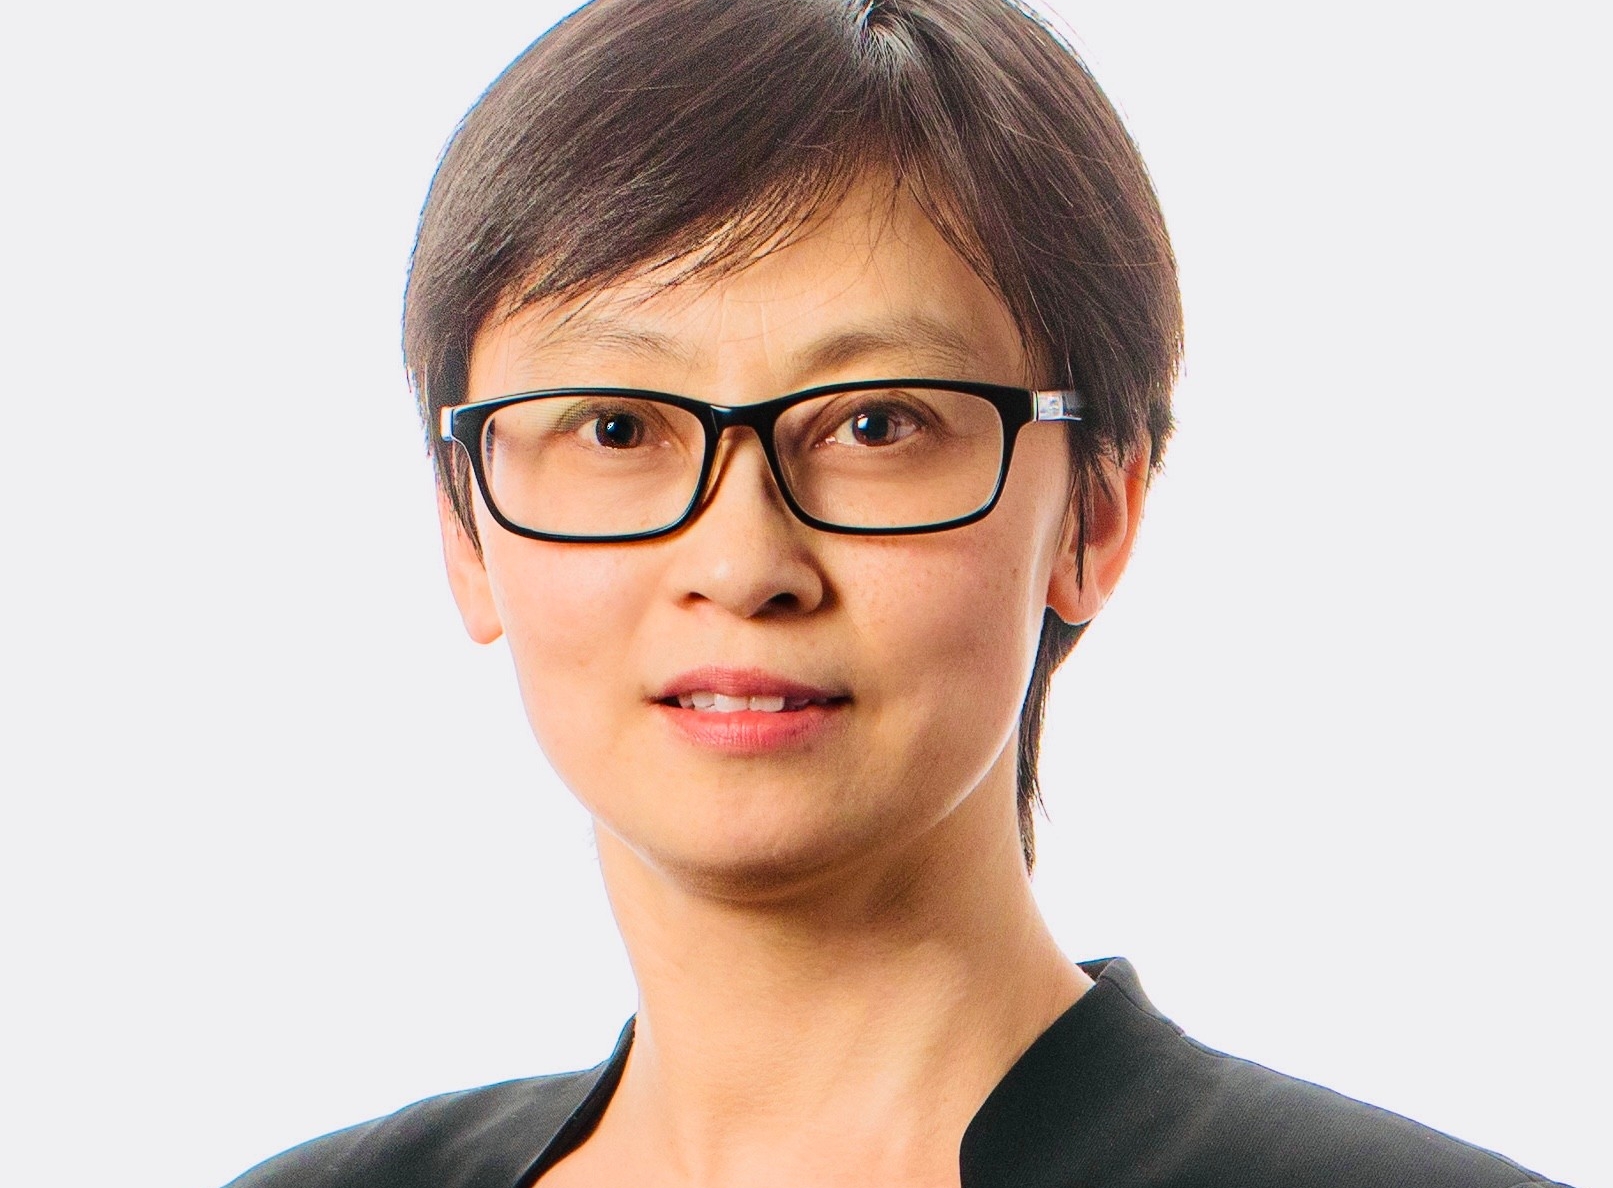 Xiaodan Pan has her hair cut short and wears glasses and dark jacket and shirt. 